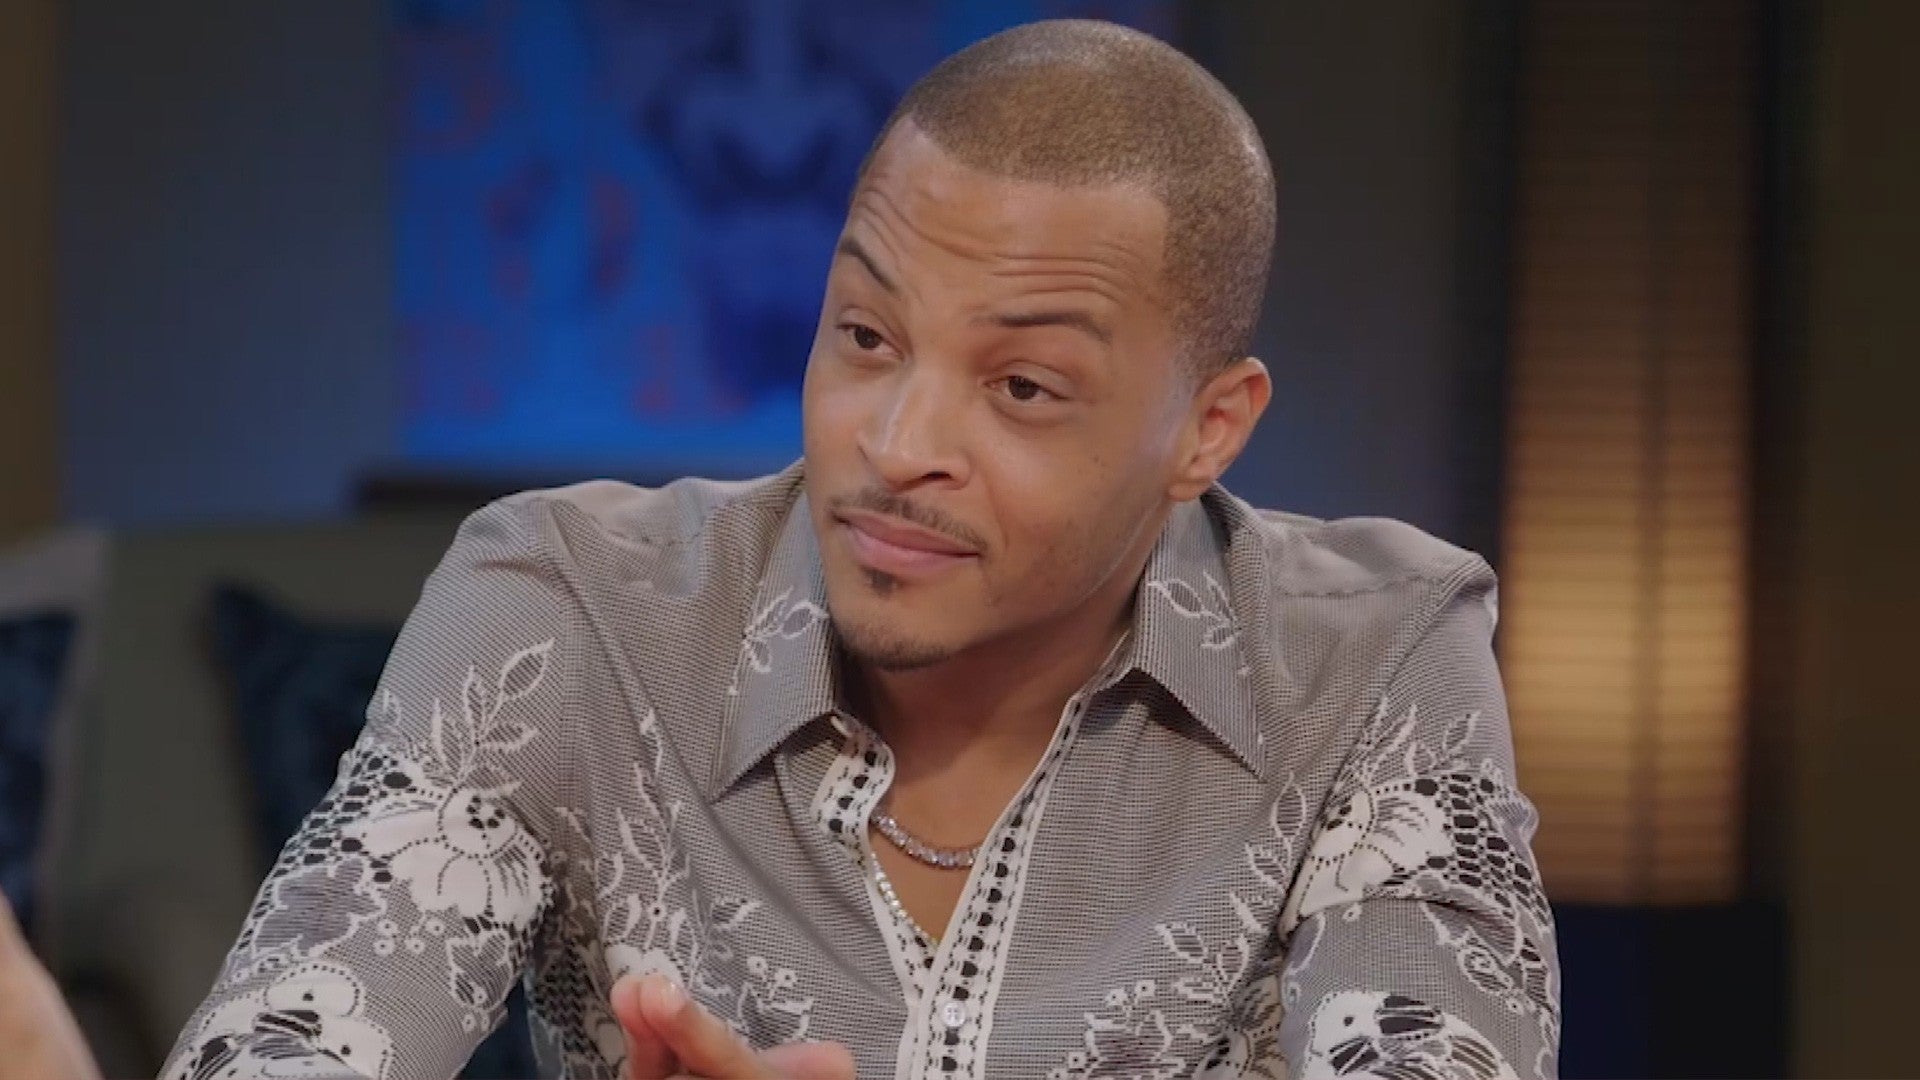 T.I. Say’s Look My Comments Were Made Jokingly About Hymen Check